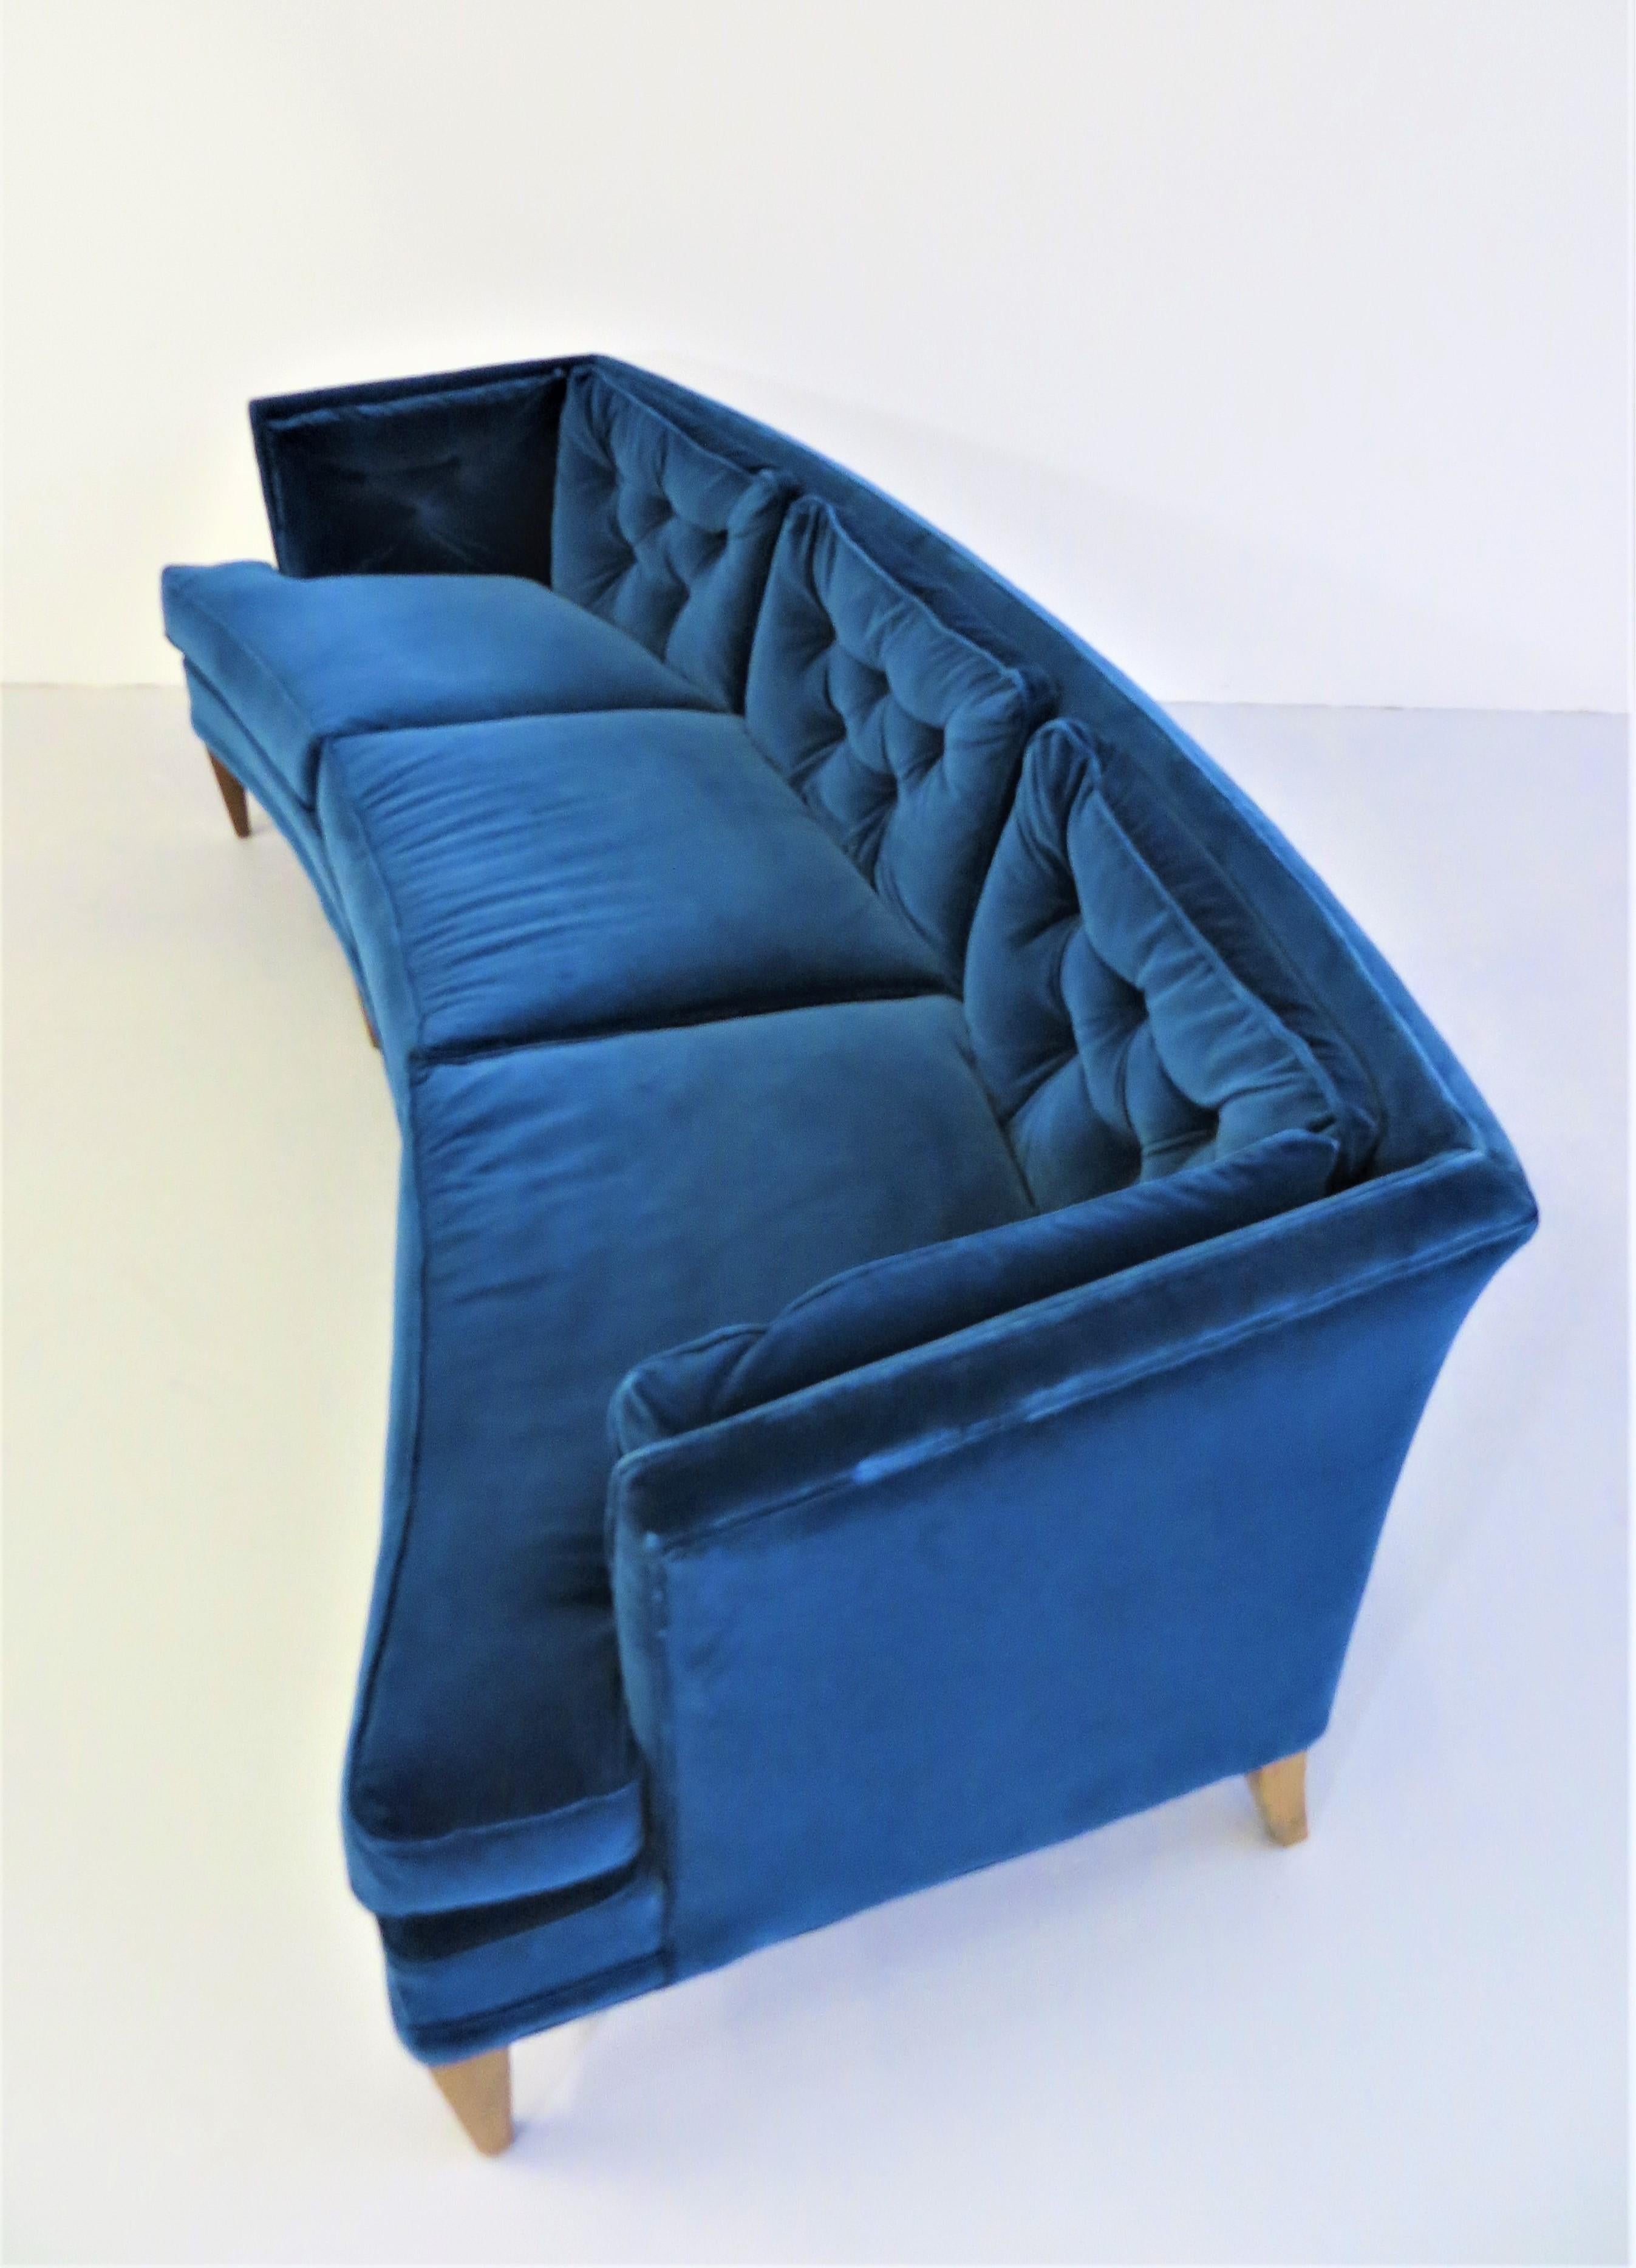 Mid-Century Modern Drama 3-seat sofa design-classic with a beautiful banana / bow curved shaped by Edward Wormley from 1950s. 
This Dunbar sofa is very comfortable, from 1st-class and luxury quality in Italian velvet by Dedar Milano ( Adam & Eva